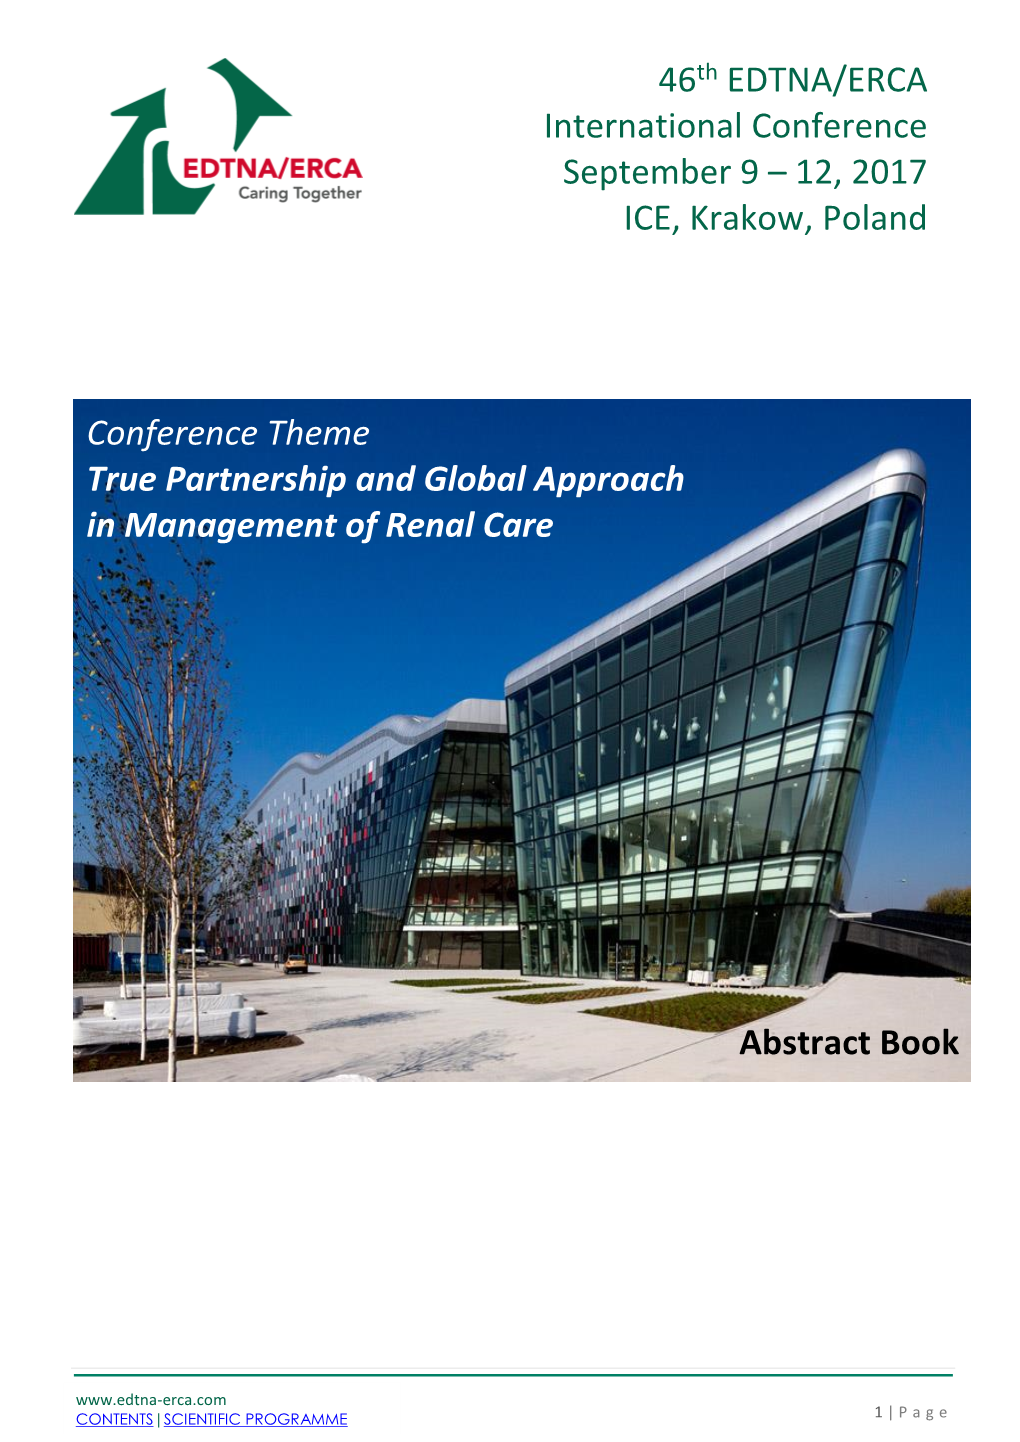 Conference Abstract Book